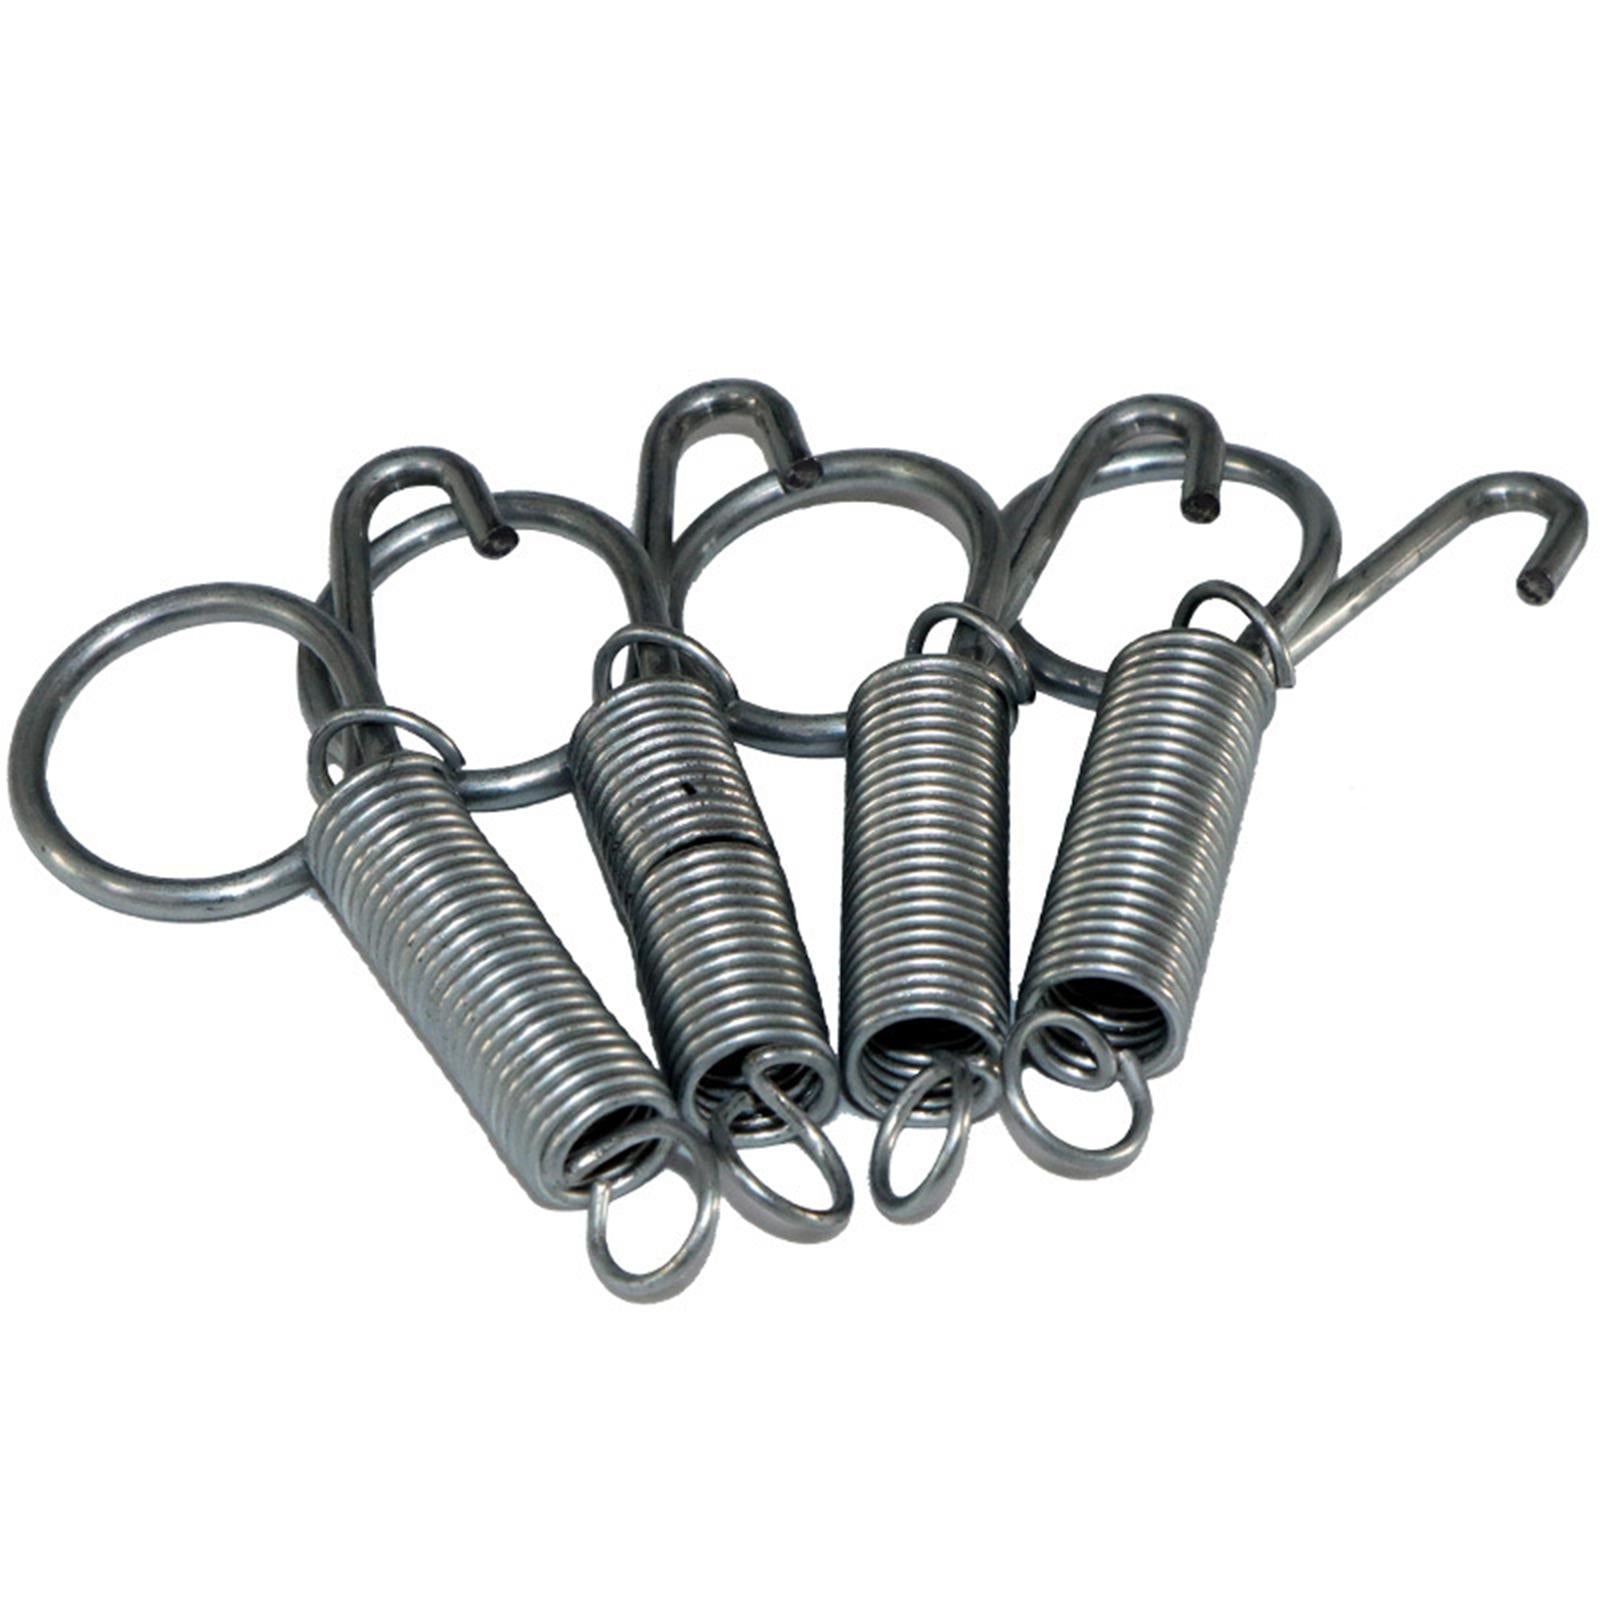 10 Packs Elastic Metal Cage Door Spring Hook for Rabbit Cage Small